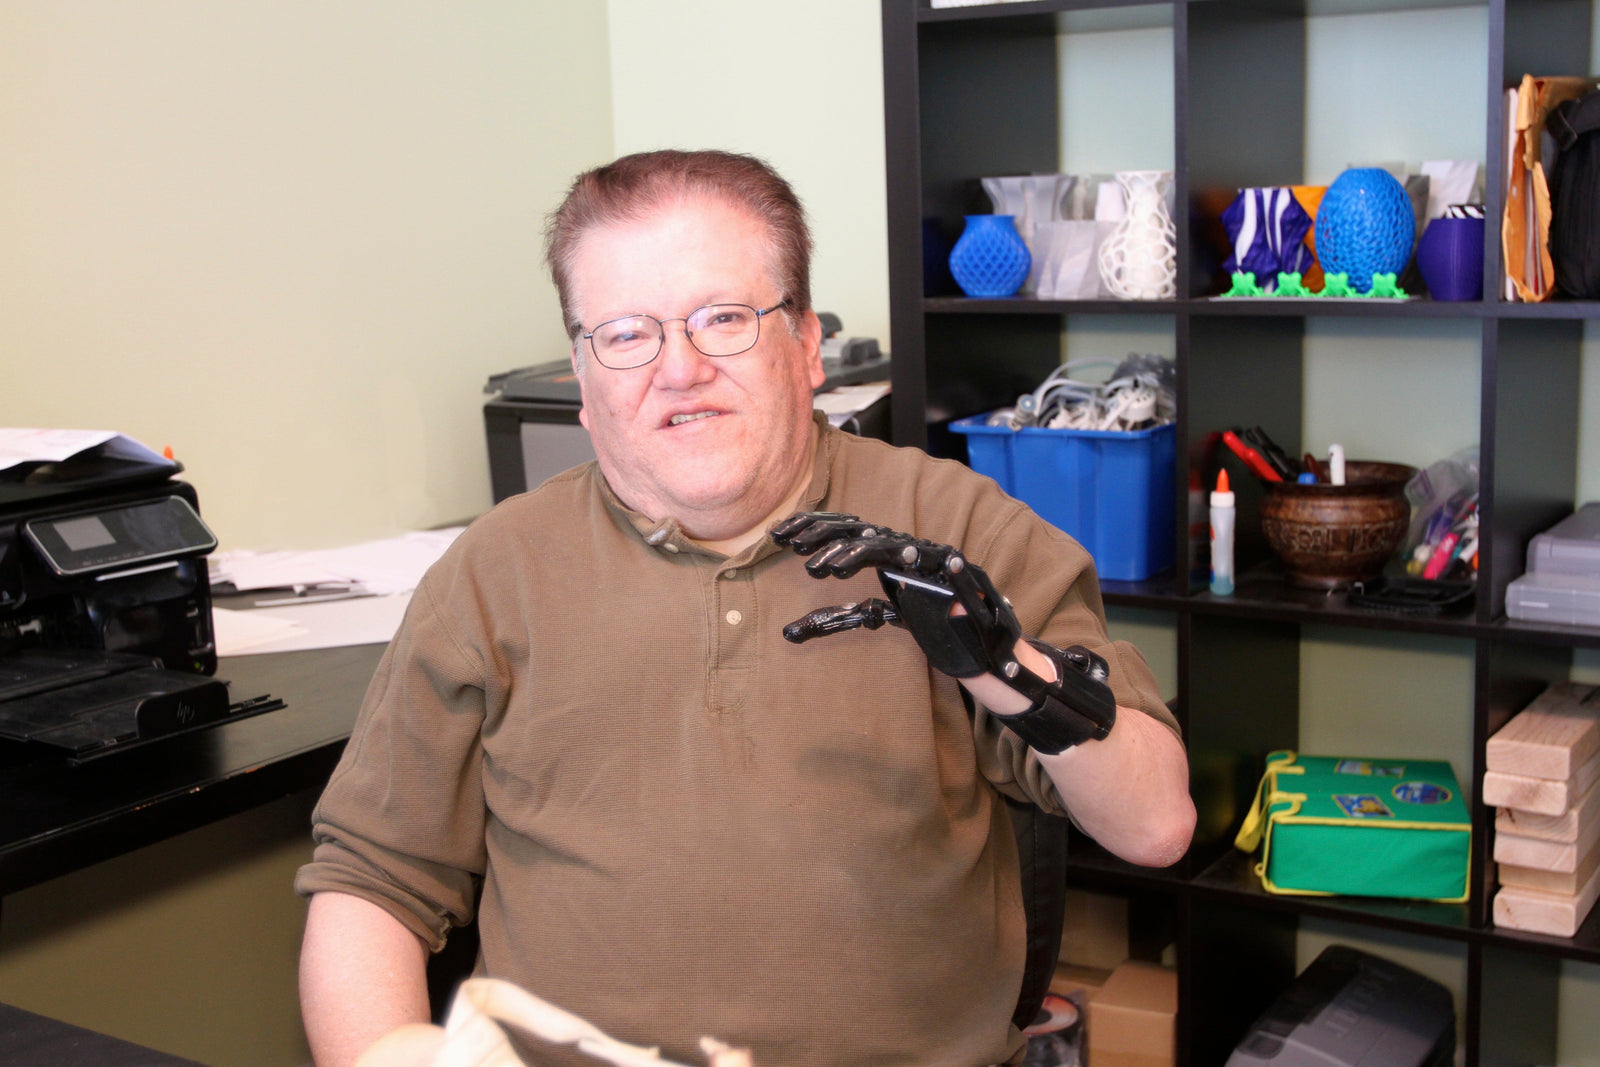 Man Compares His $50 3D Printed Hand to His $42K Prosthesis